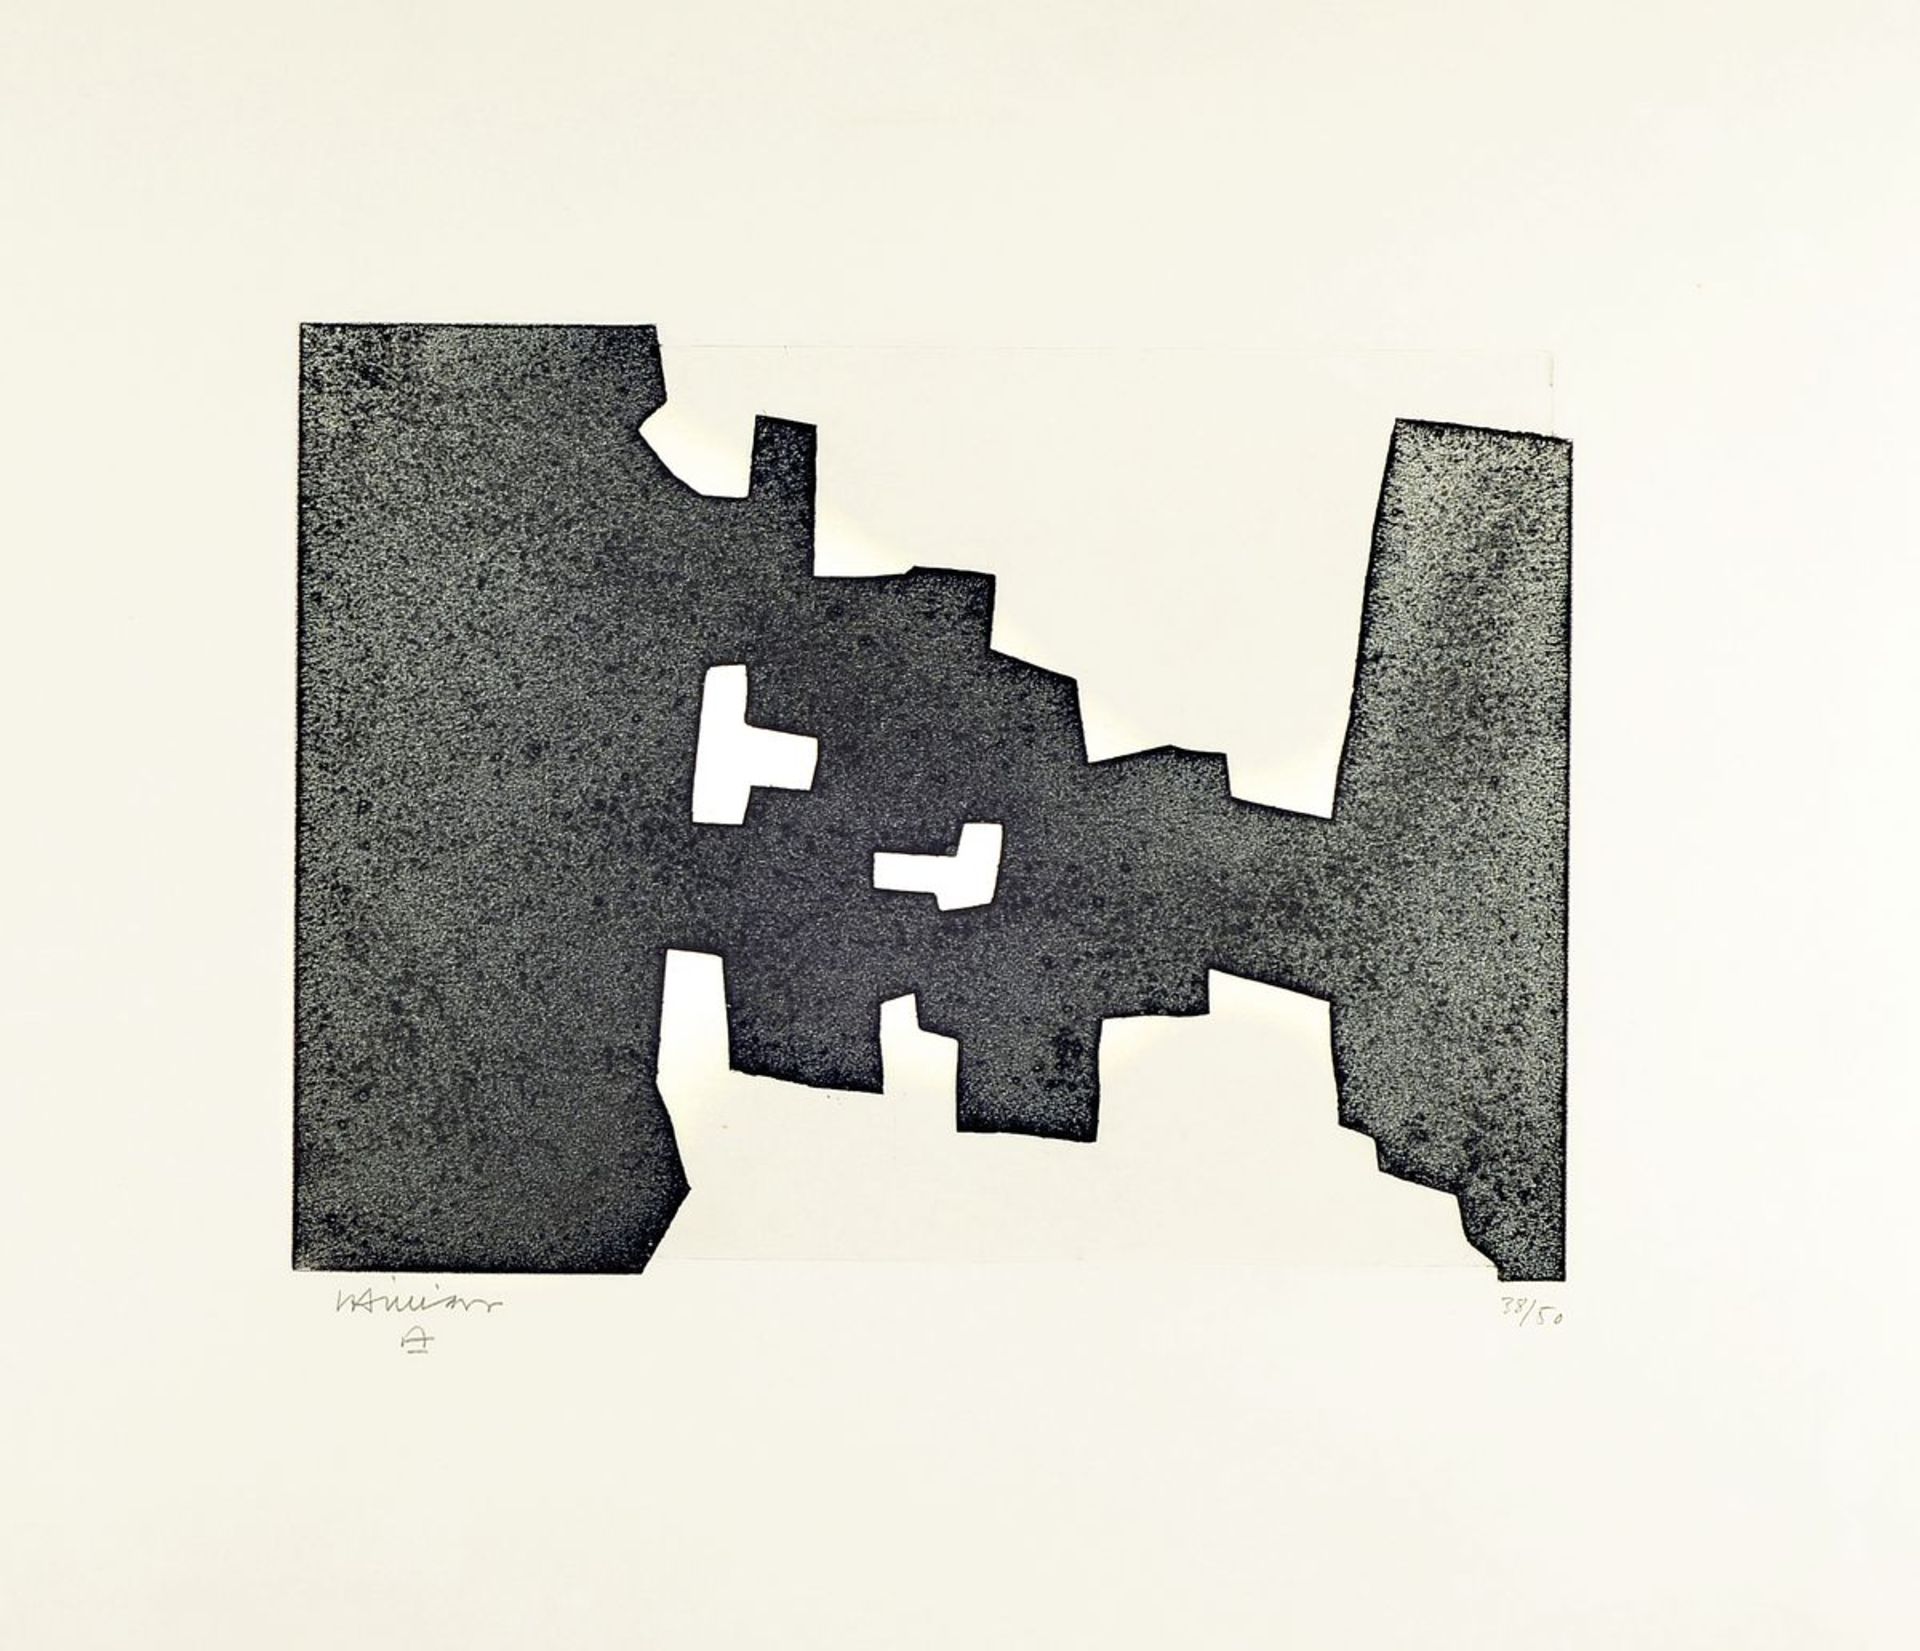 Eduardo Chillida, 1924-2002, Agindu II, etching from 1969, signed and numbered 38/50, approx